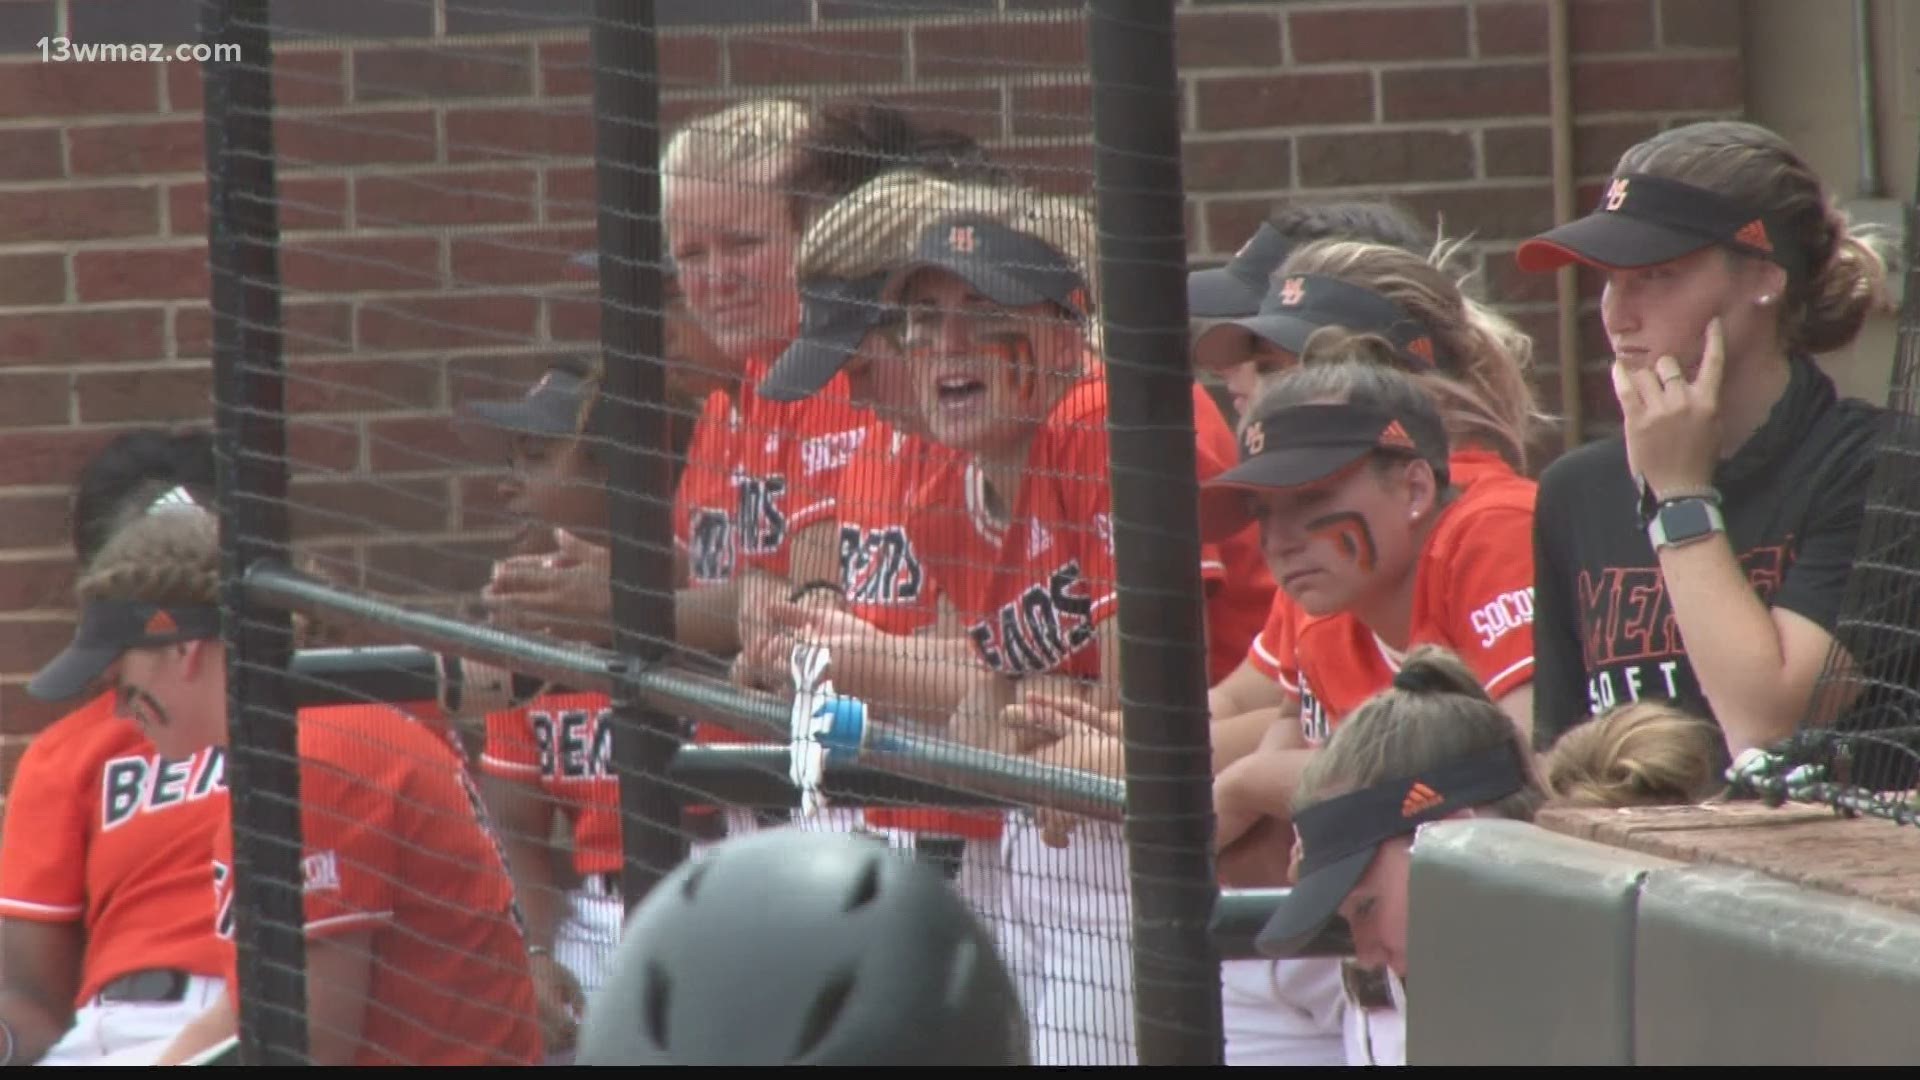 Mercer lost 5-3 on Sunday, dropping the series to UNCG. They fall to fifth in the Southern Conference standings